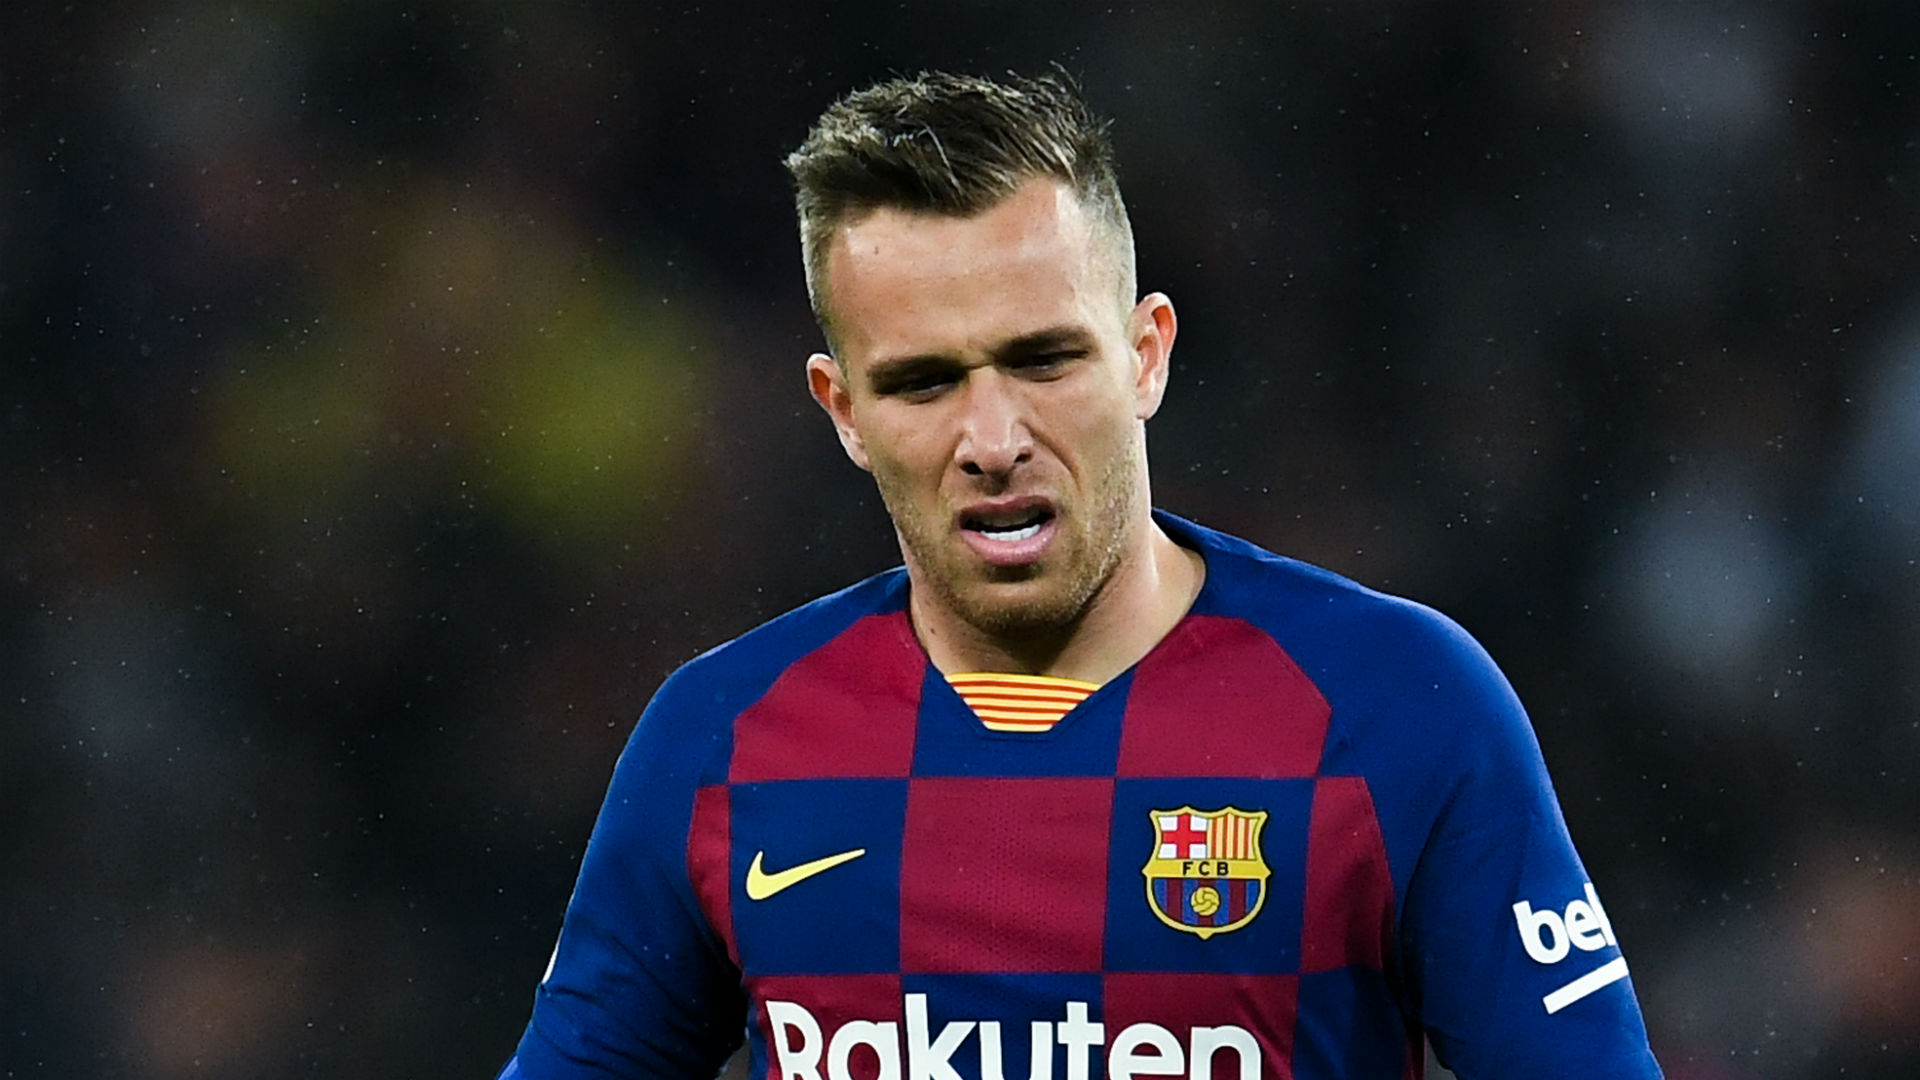 Juventus-bound Arthur reportedly wants out of Barcelona ahead of schedule and Sergio Busquets hopes some common ground is found.